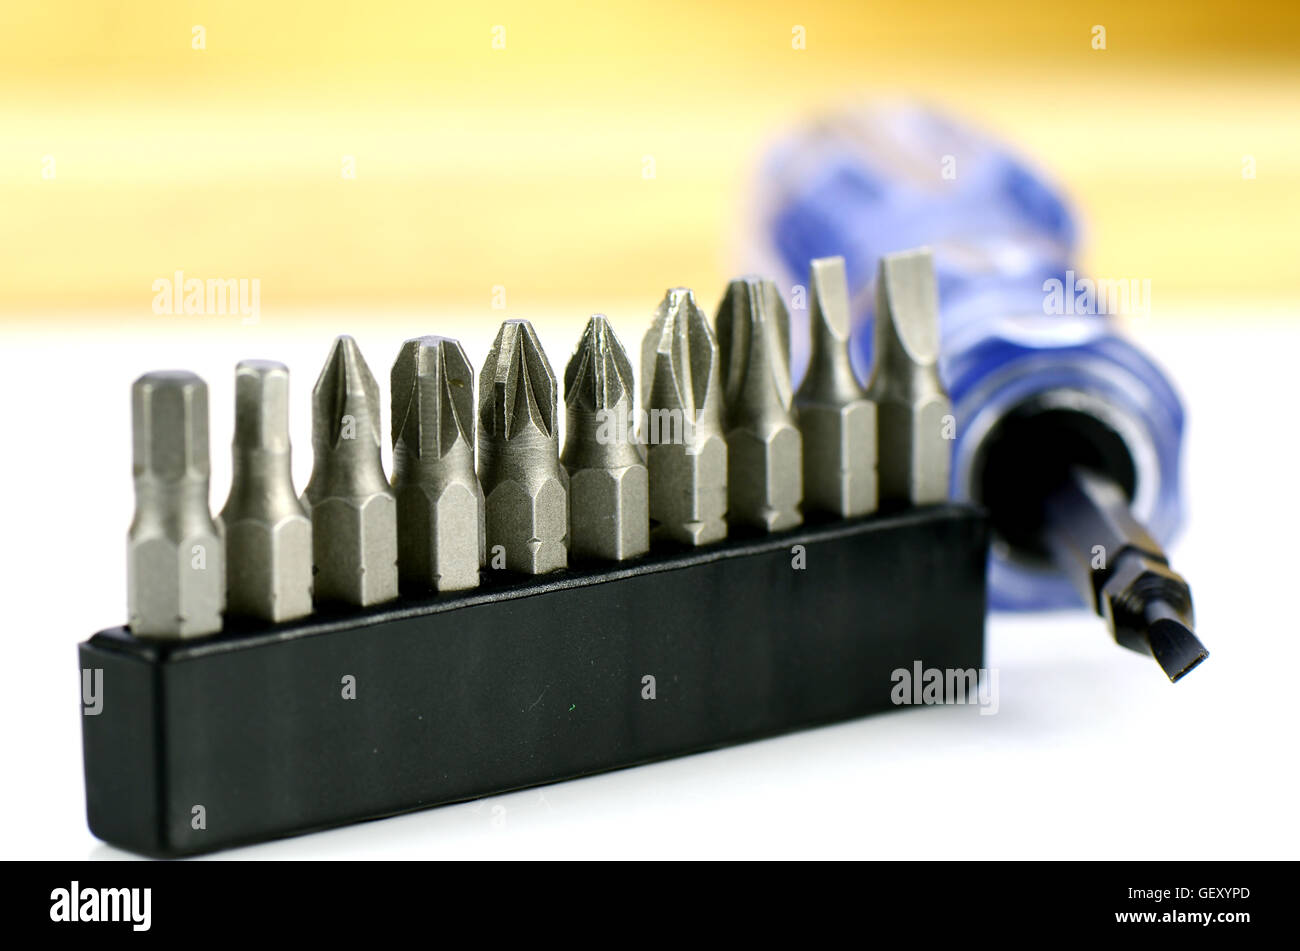 Cordless screwdrivers with various kind of screw tips. Stock Photo